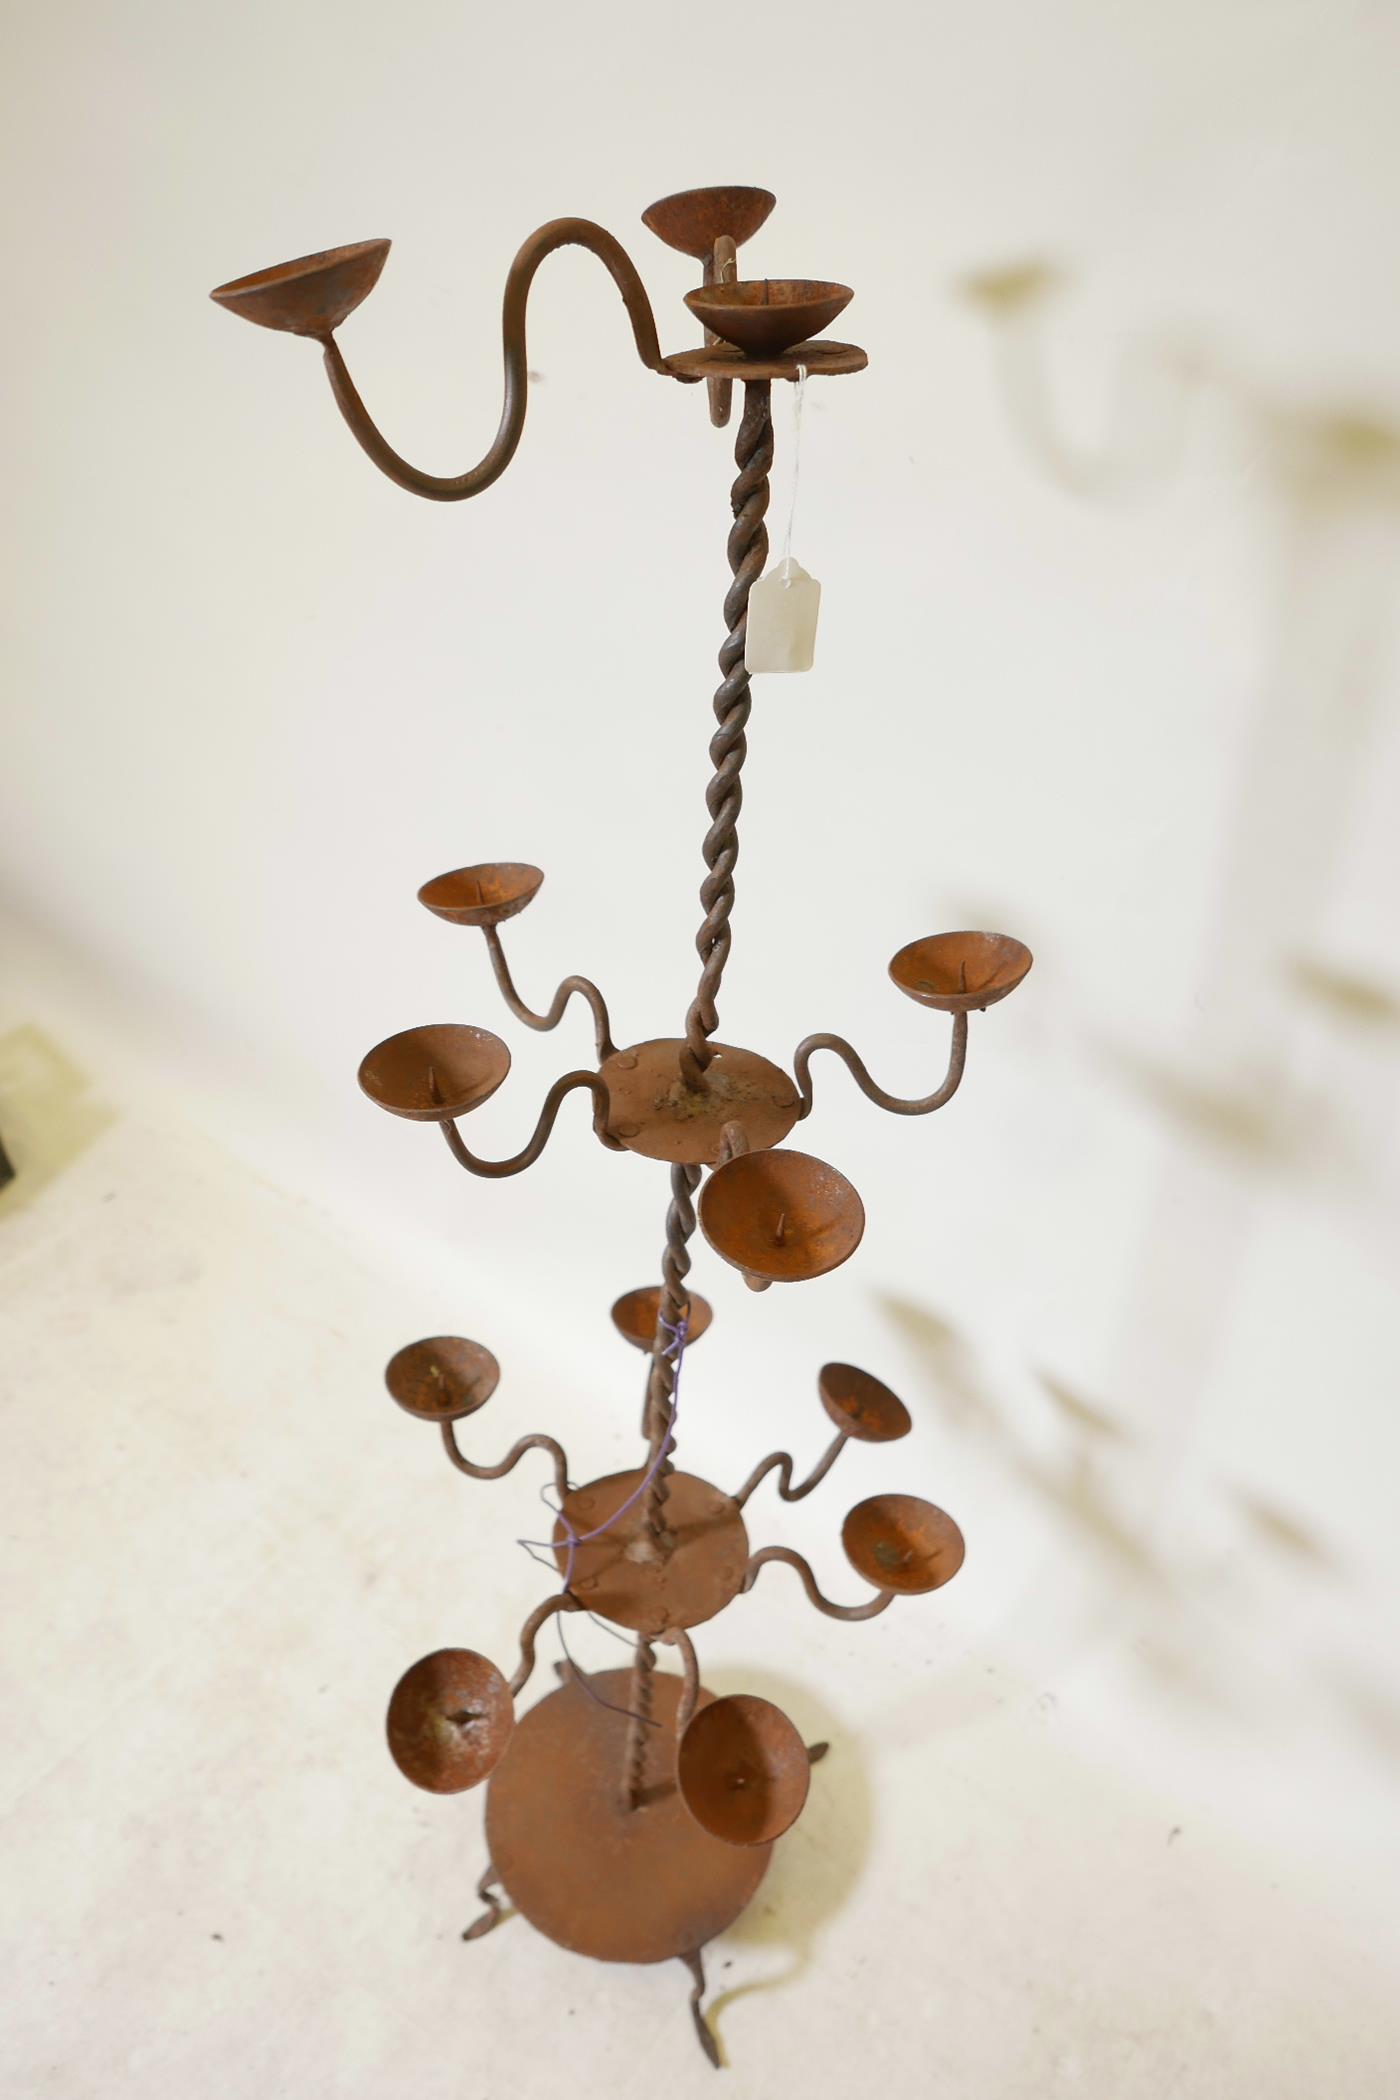 A wrought iron floor standing pricket candlestick, A/F missing branches, 43" high - Image 3 of 3